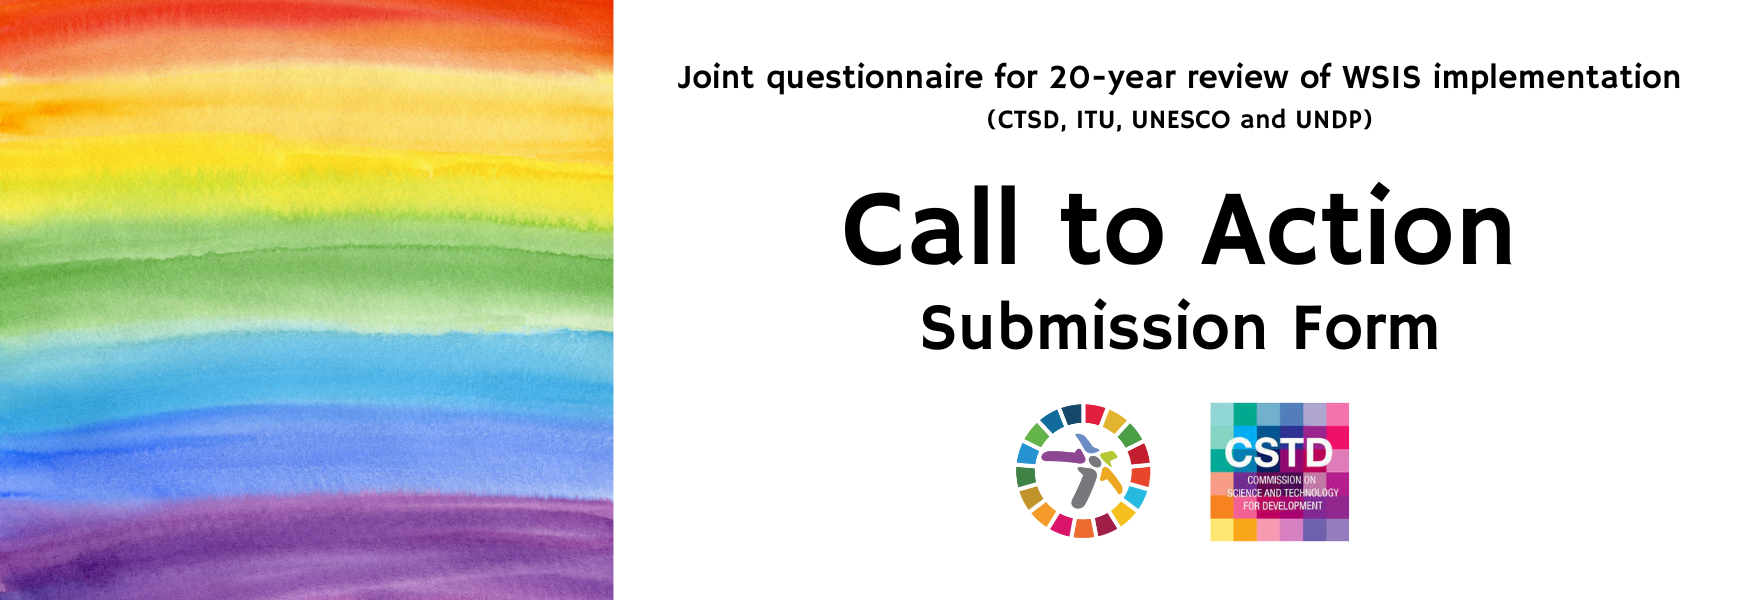 Joint questionnaire for 20-year review of WSIS implementation (CTSD, ITU, UNESCO and UNDP)